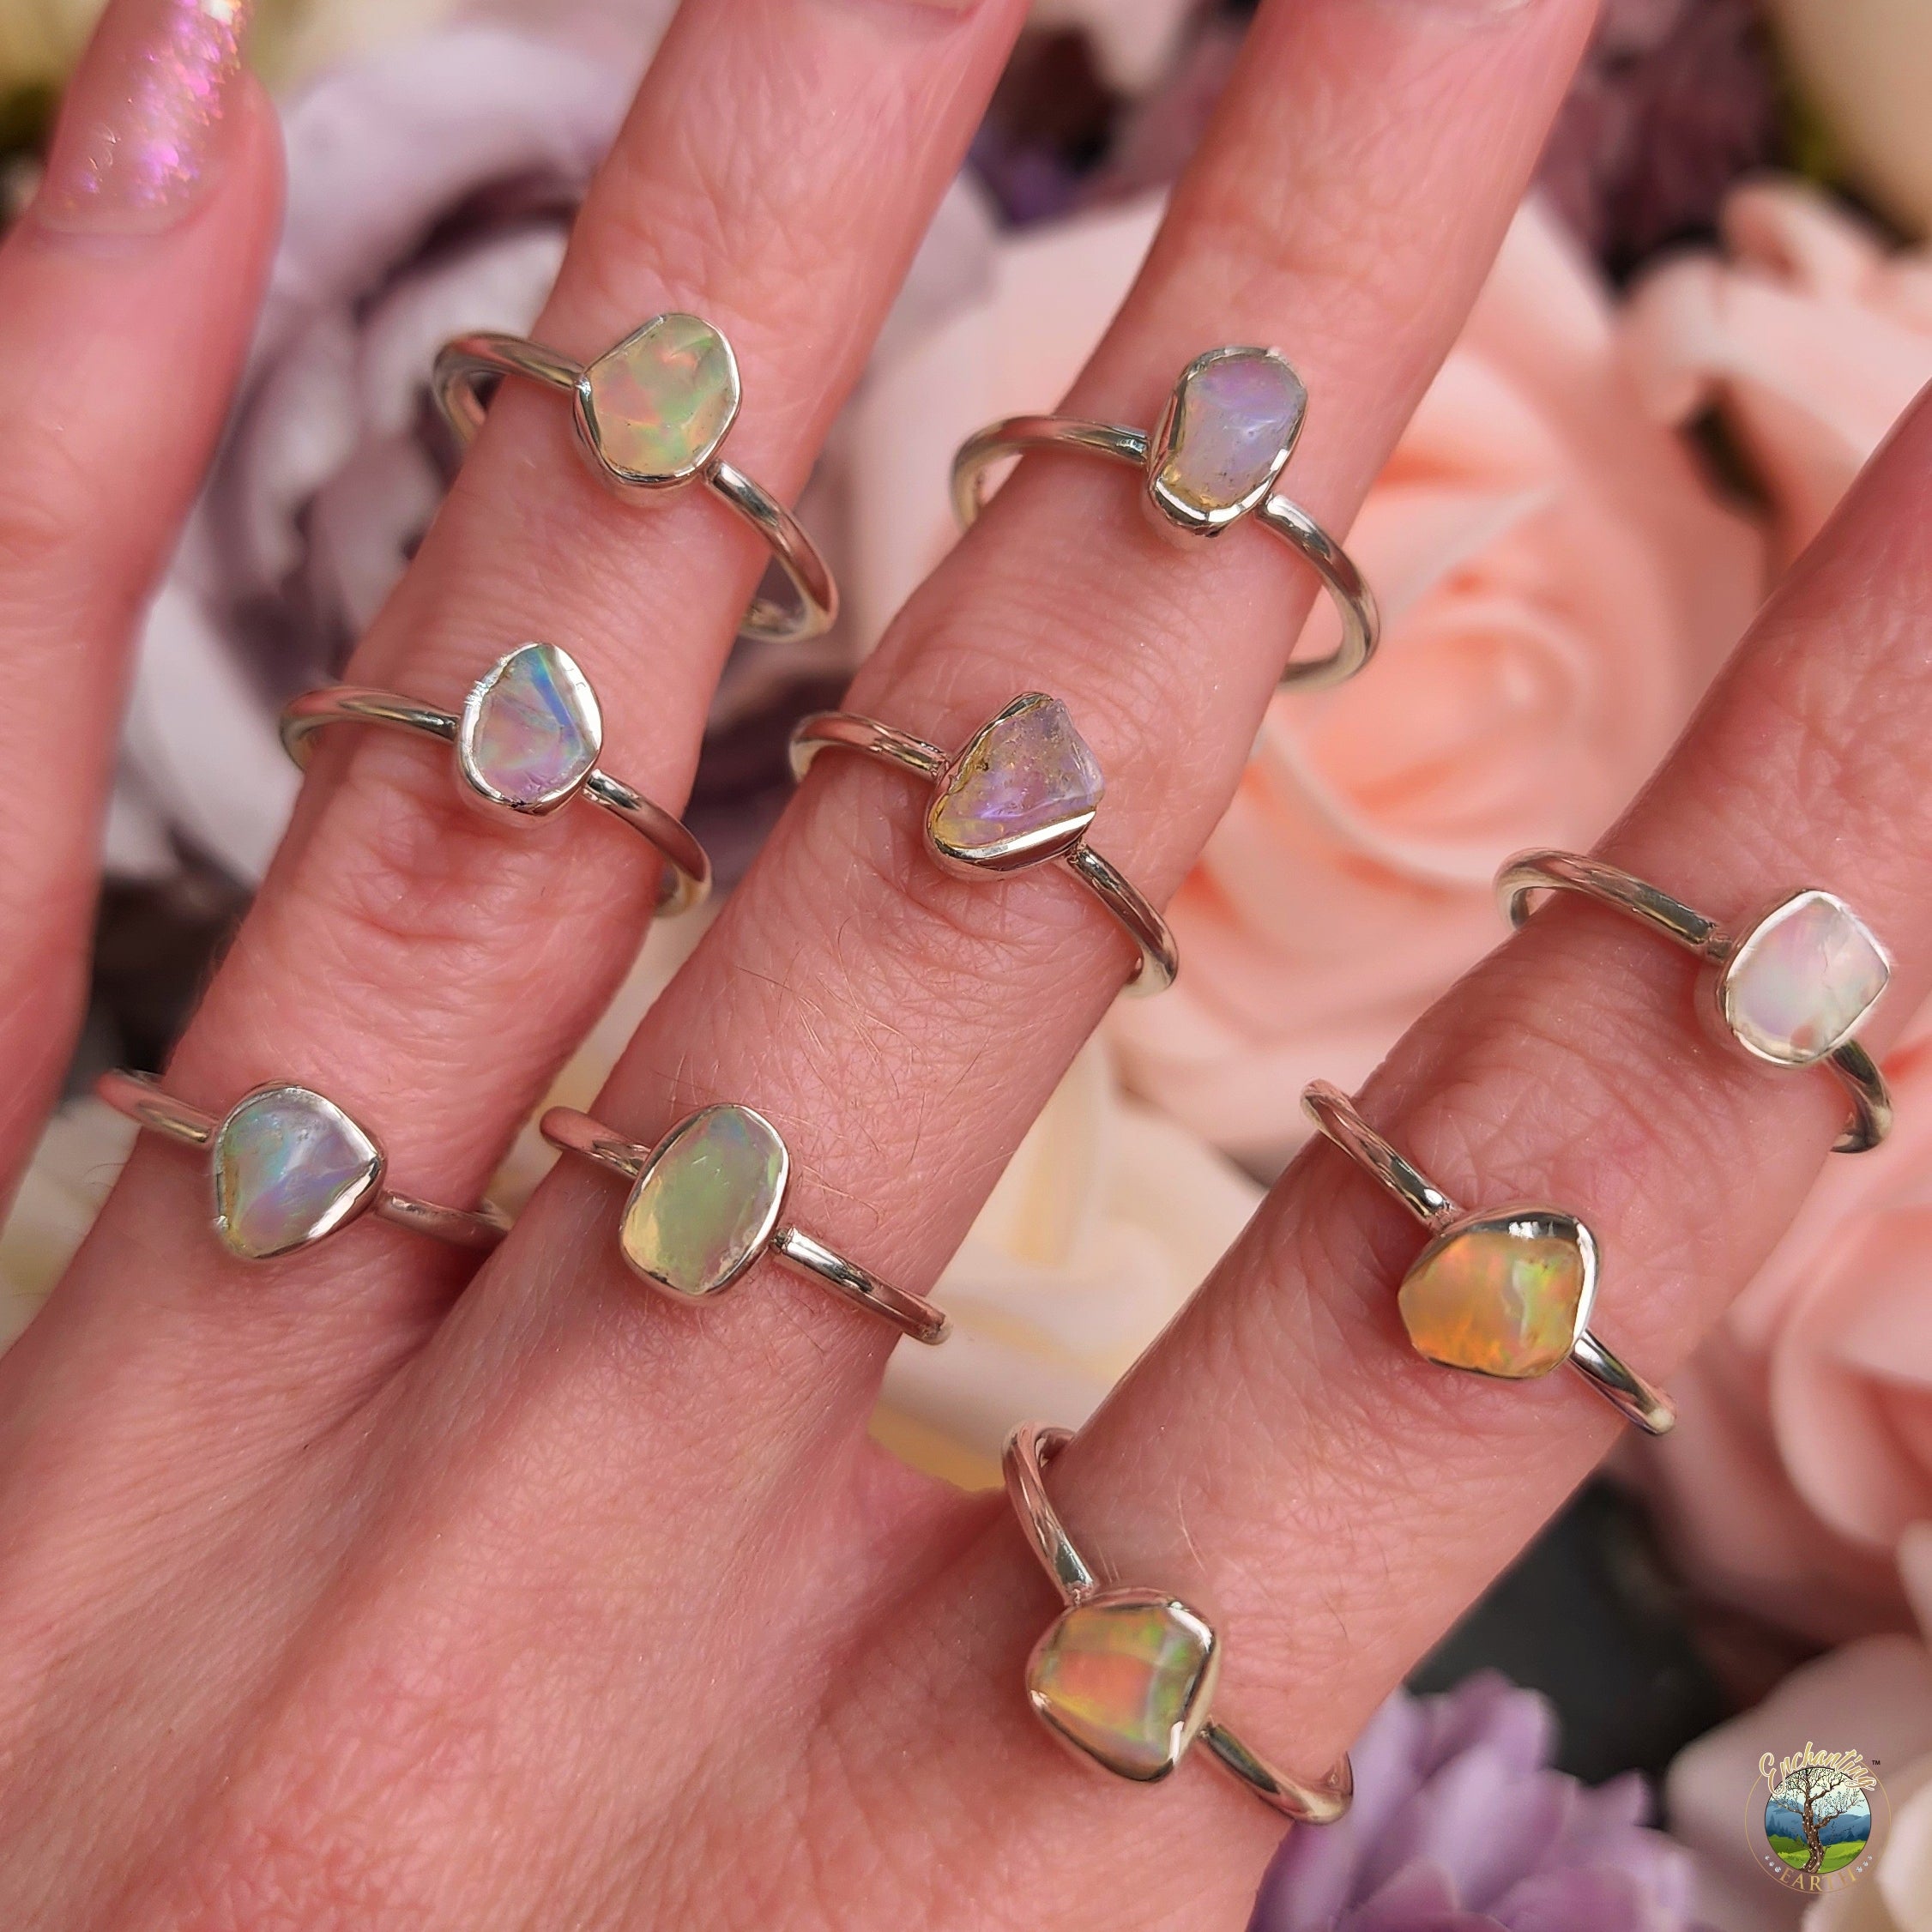 Ethiopian Opal Raw Dainty Ring .925 Silver for Creativity, Joy and Pursuing your Dreams